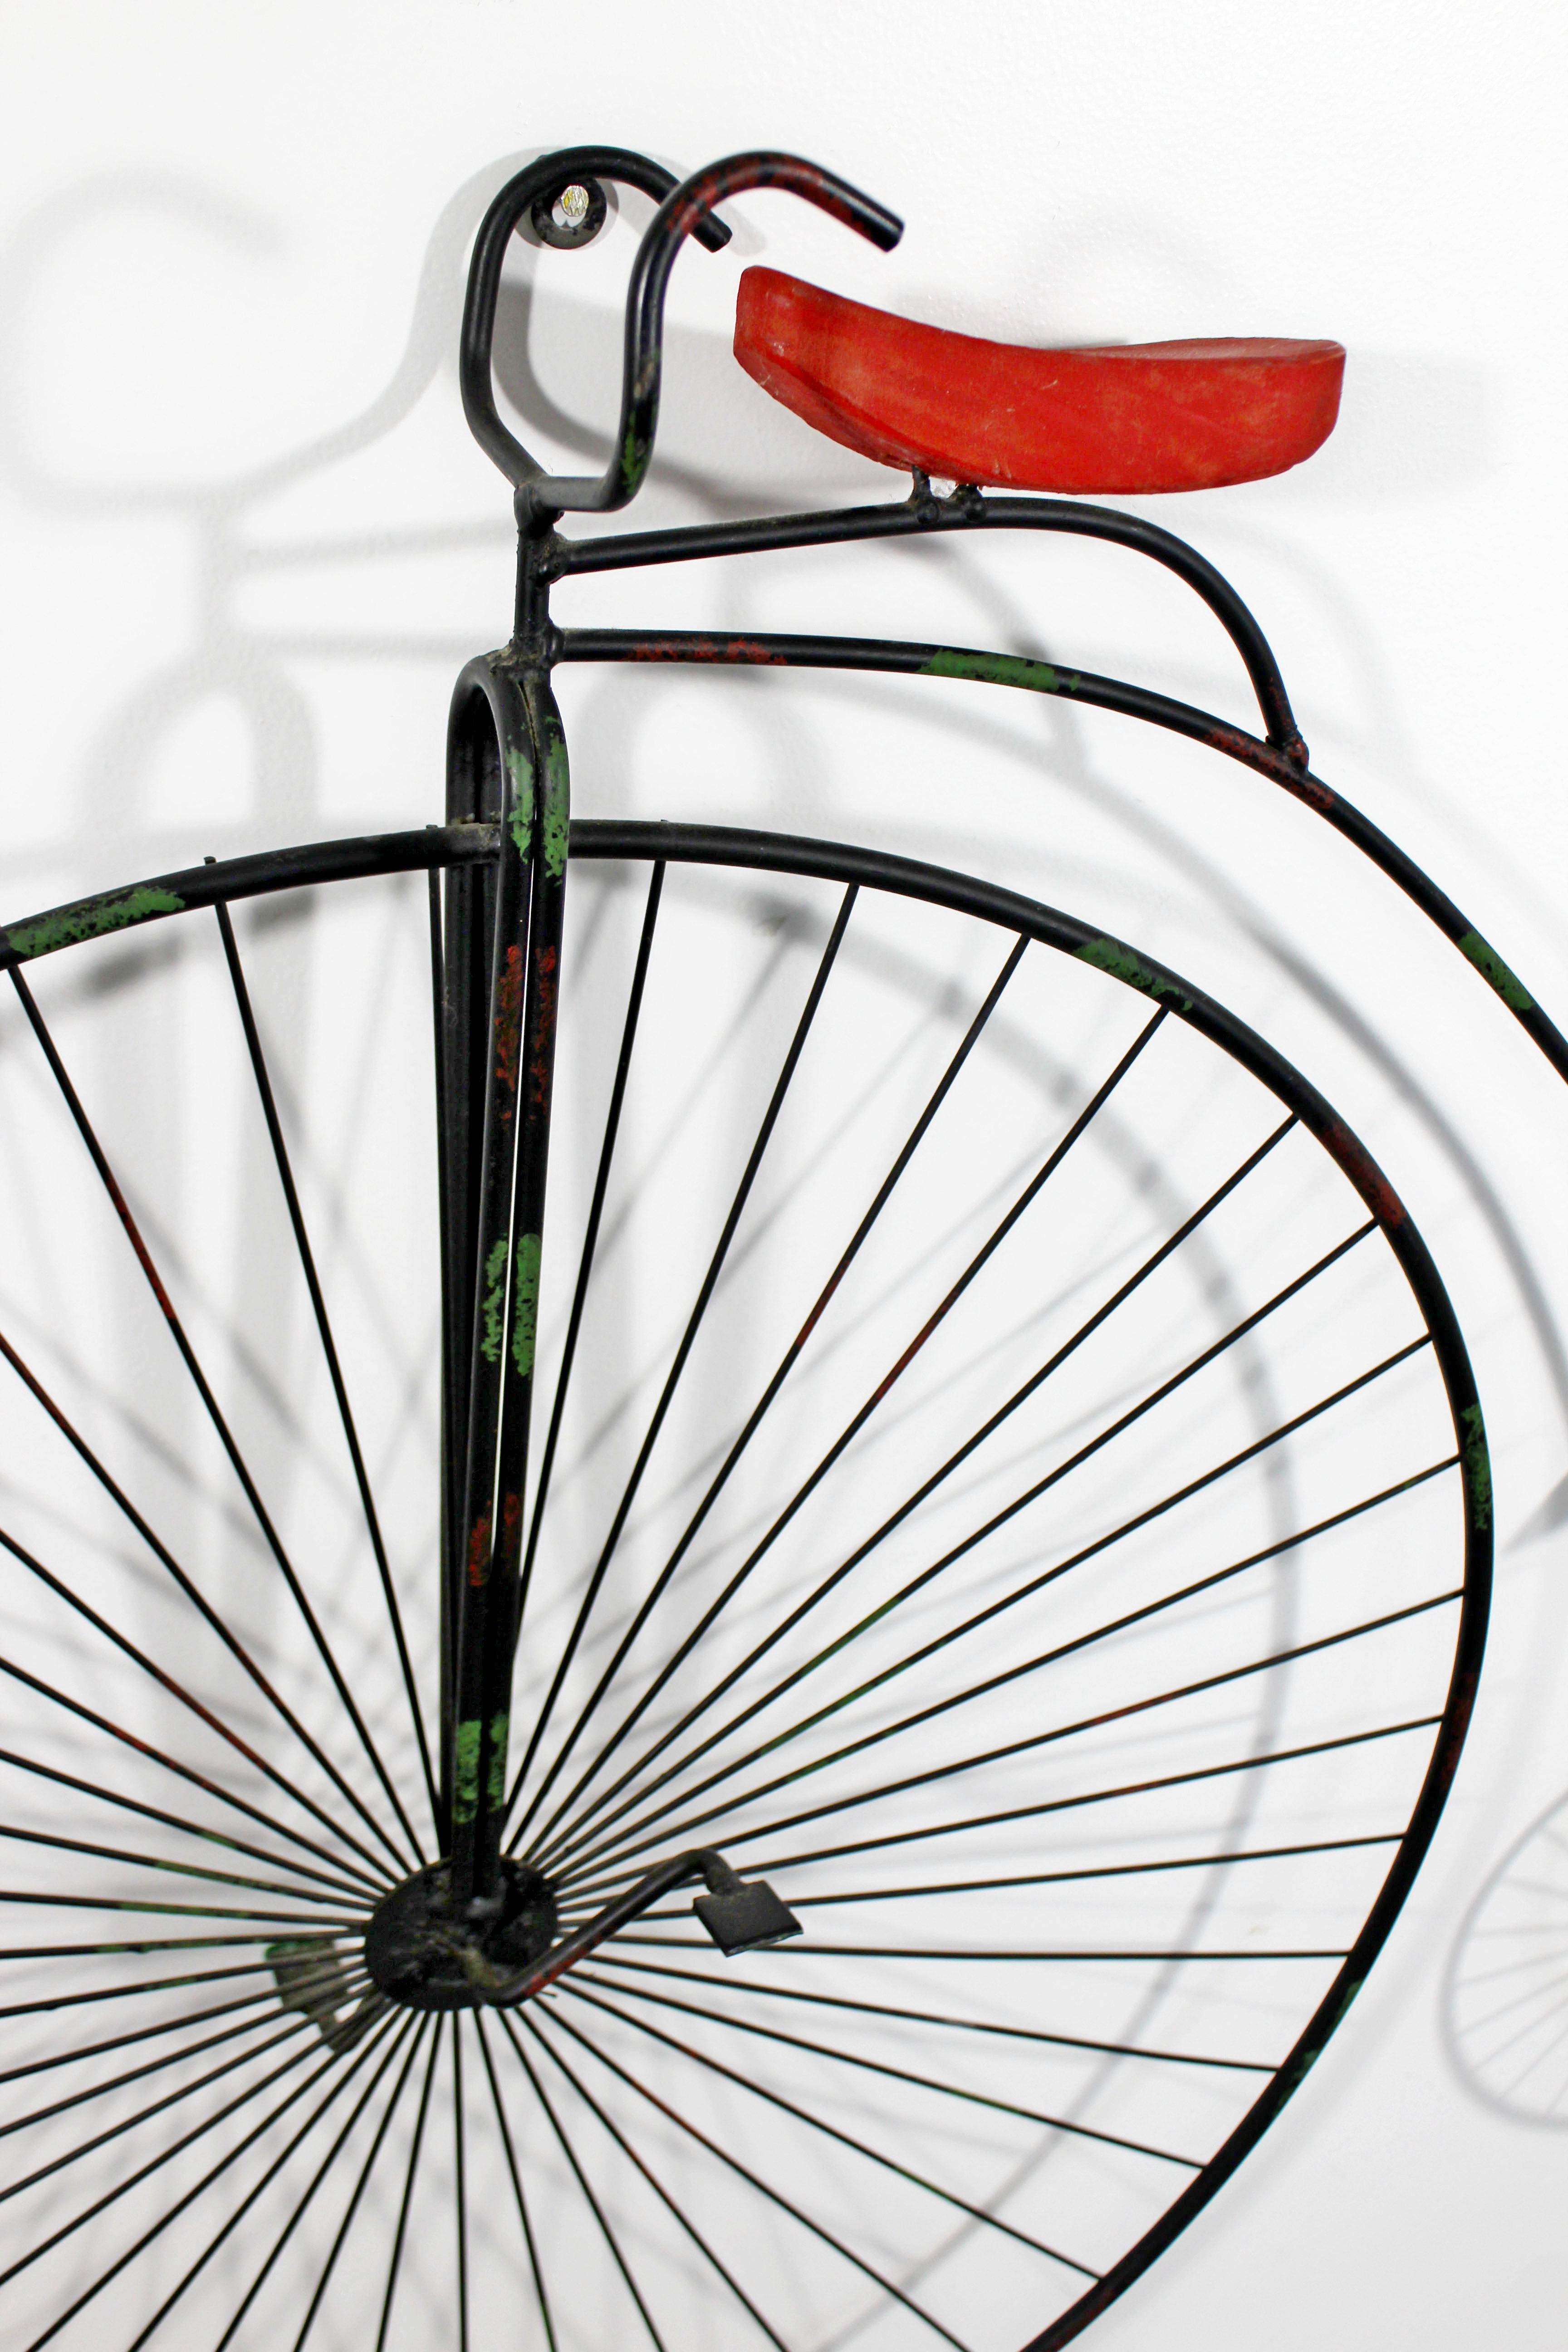 Late 20th Century Contemporary Modern C Jere Signed Metal Bicycle with Red Seat Sculpture 1980s